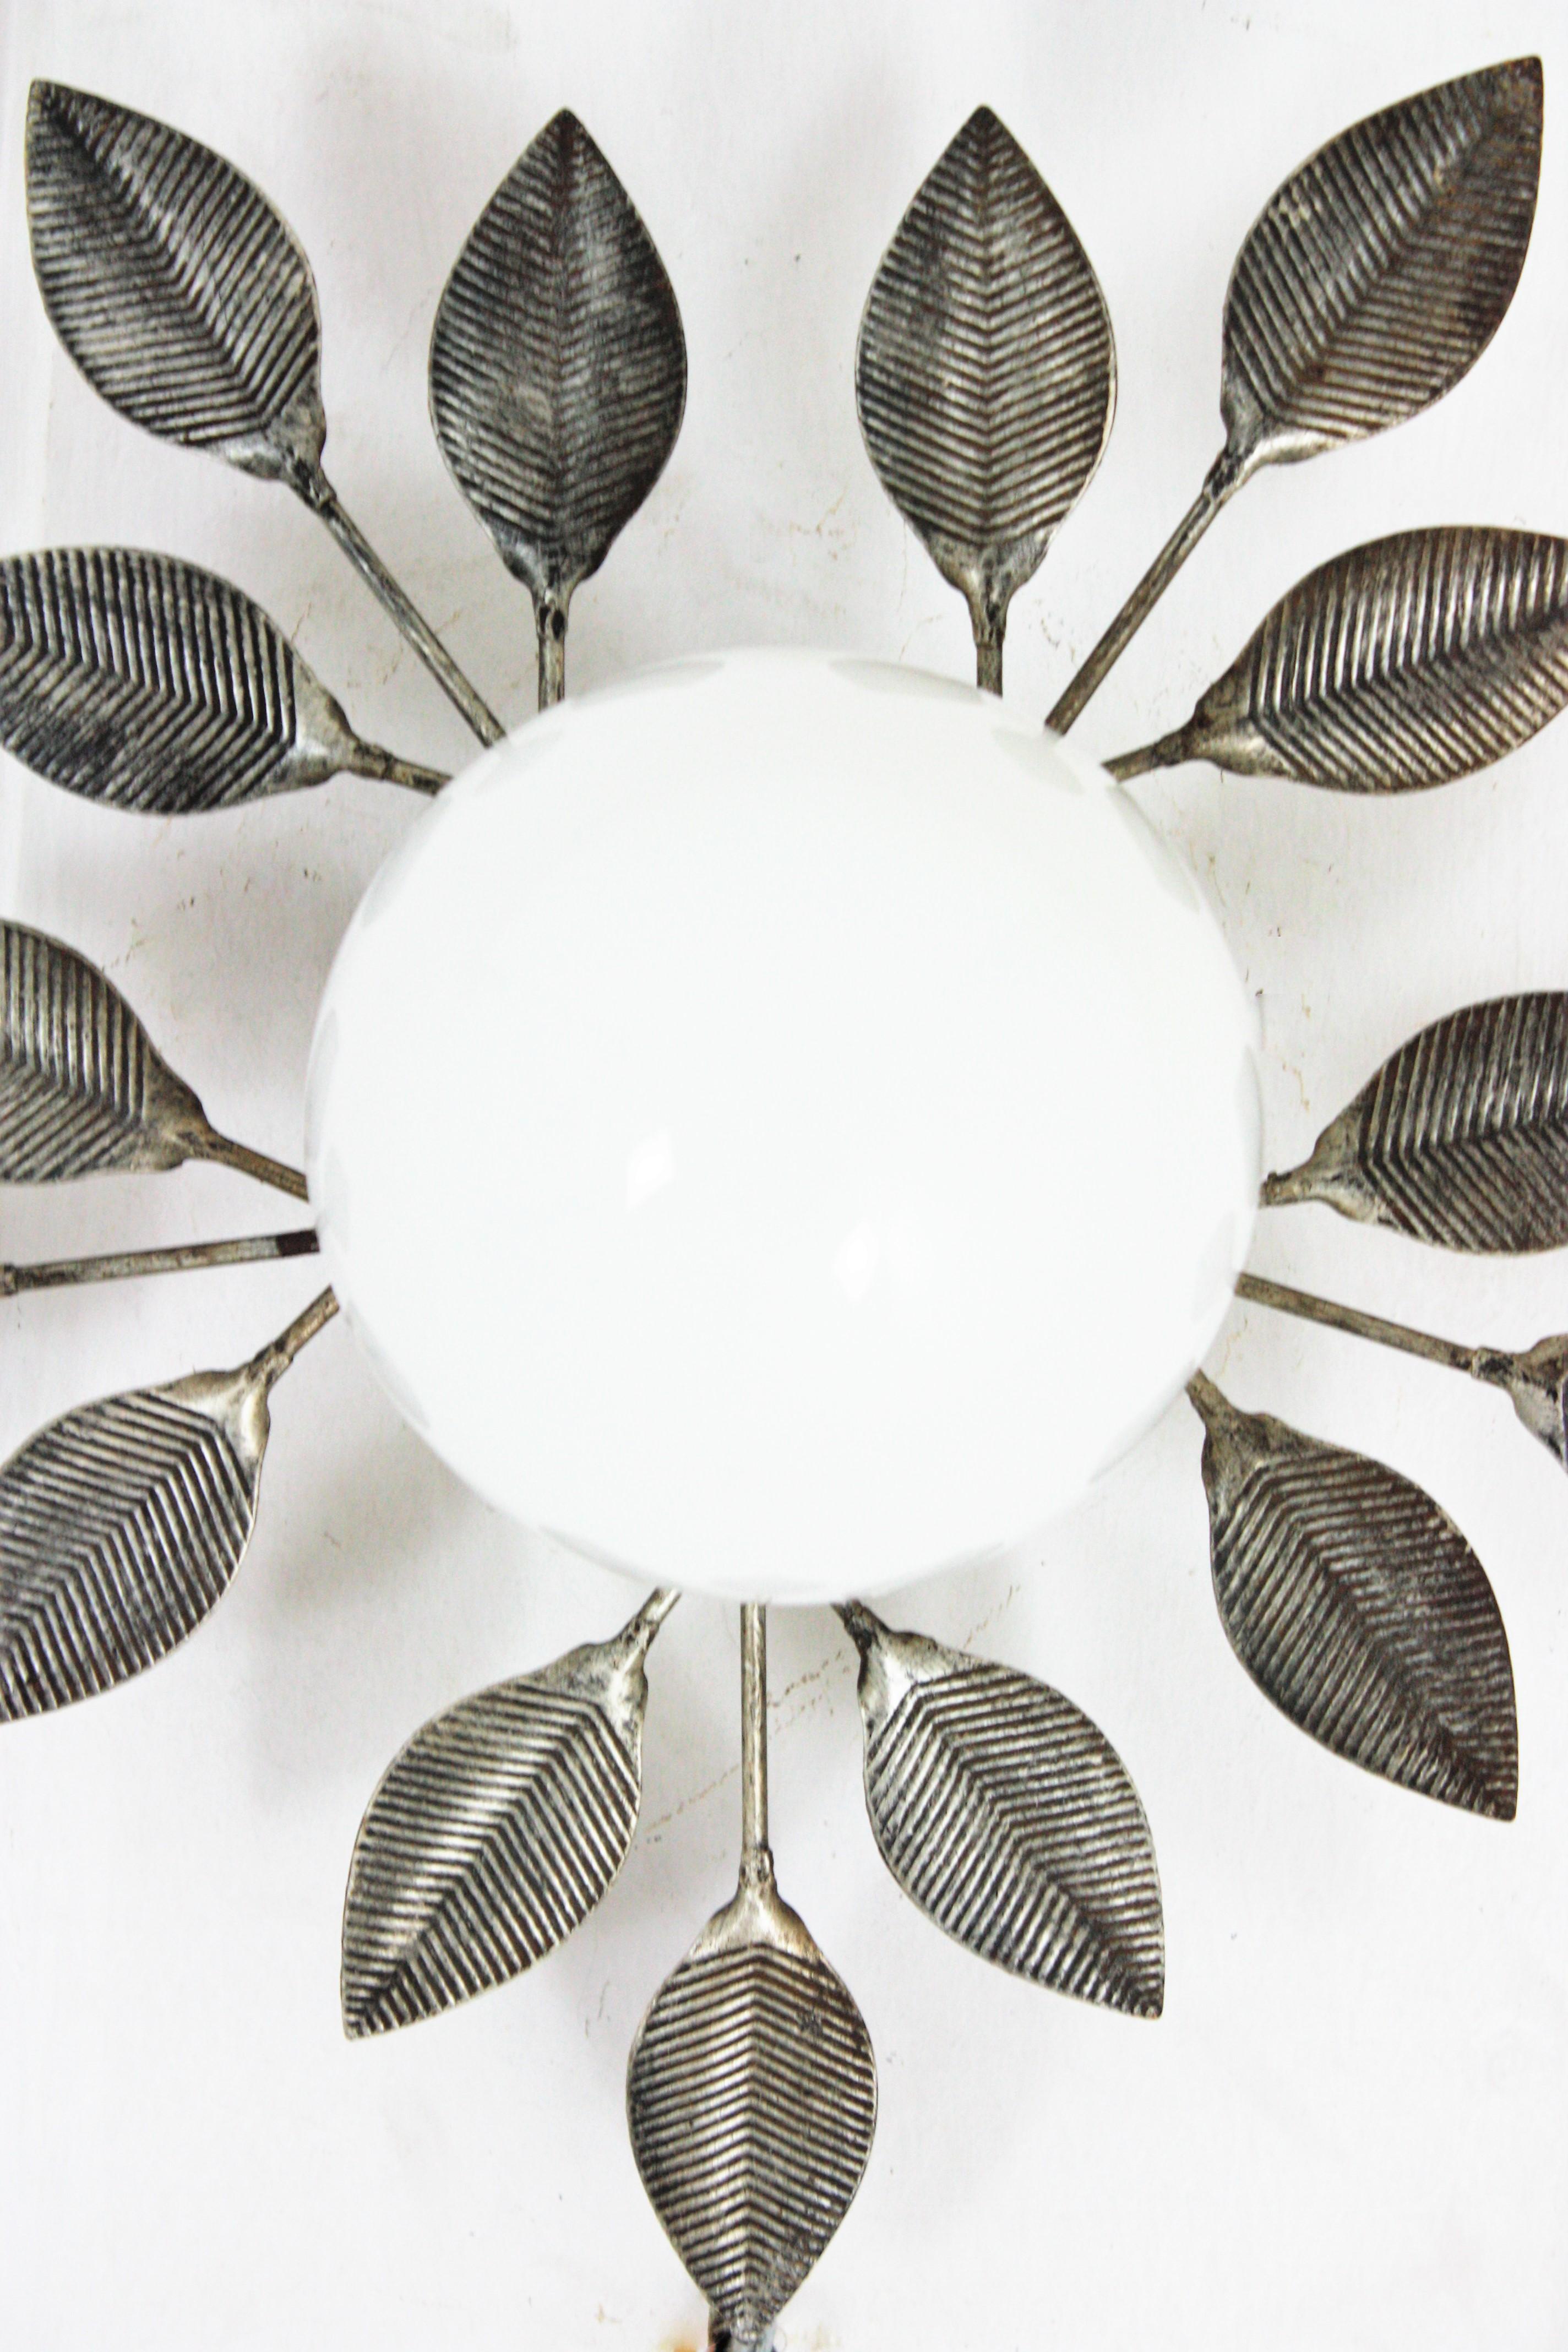 Spanish Foliage Silvered iron Light Fixture with Milk Glass Globe, 1960s For Sale 2